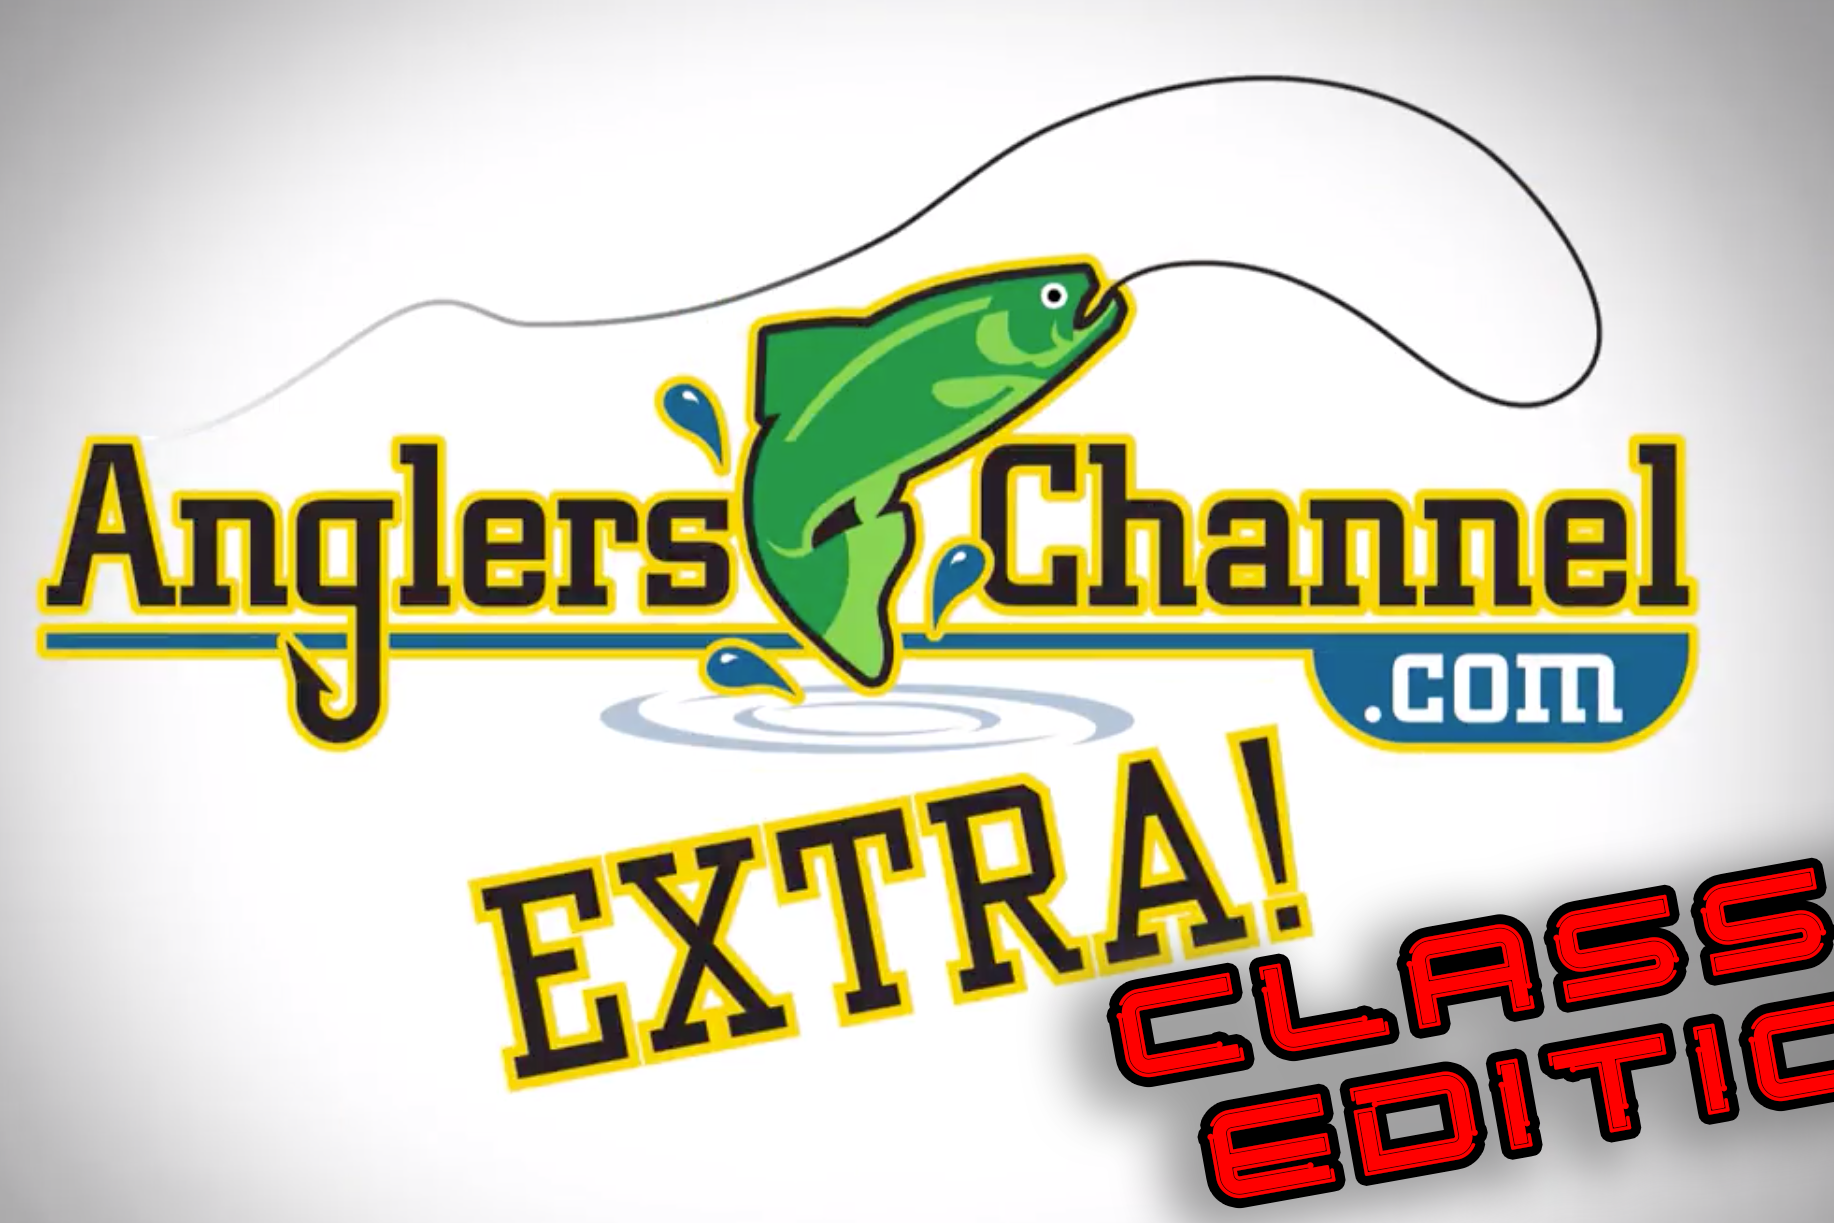 AnglersChannel Bass Wrap Up – Anglers Channel